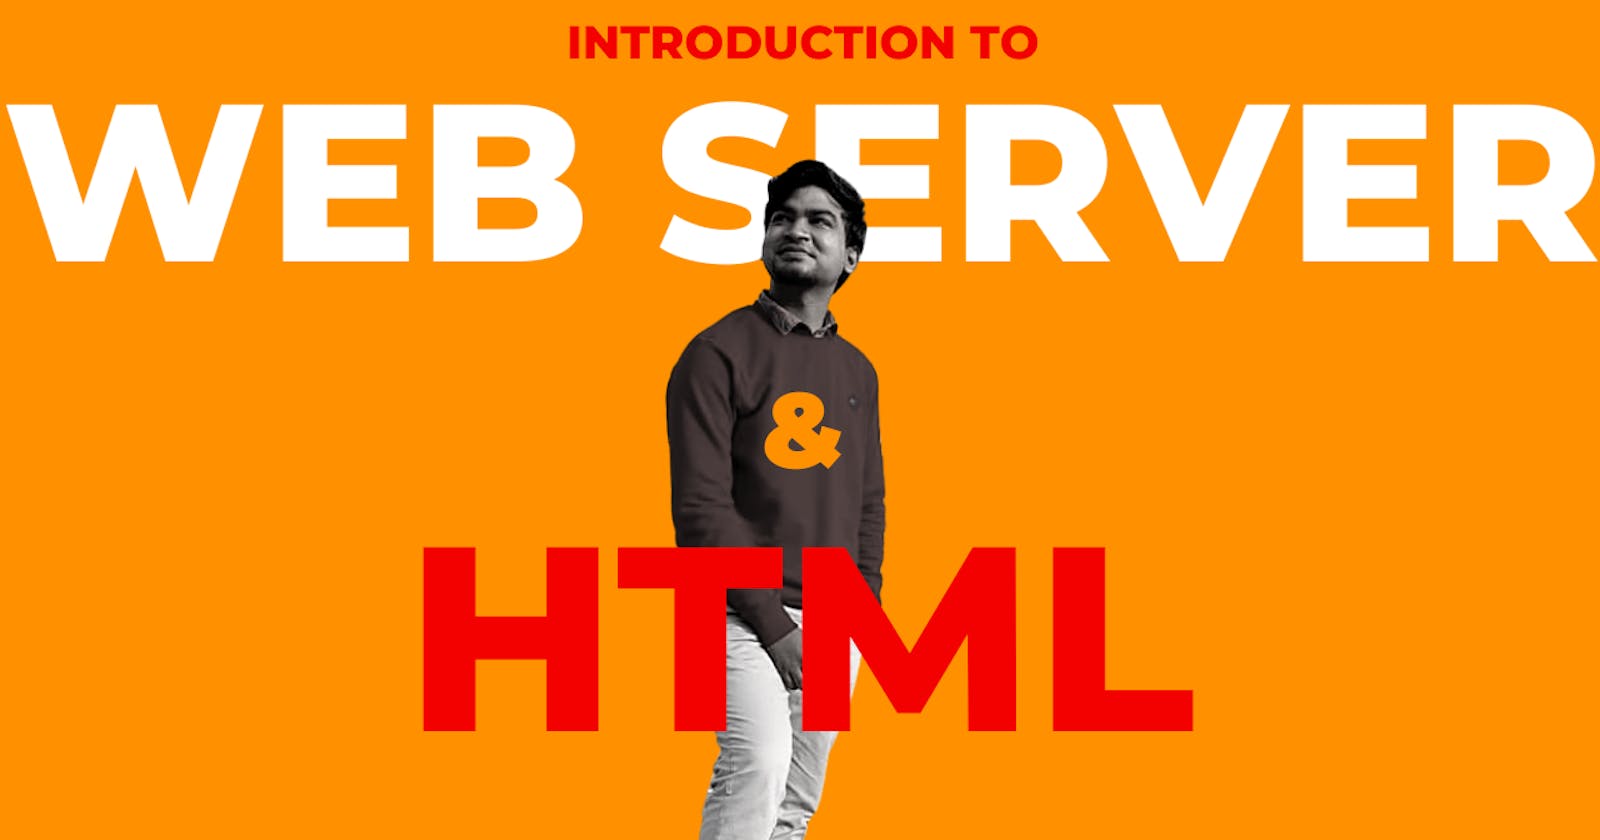 A Brief Understanding of Web Server and HTML